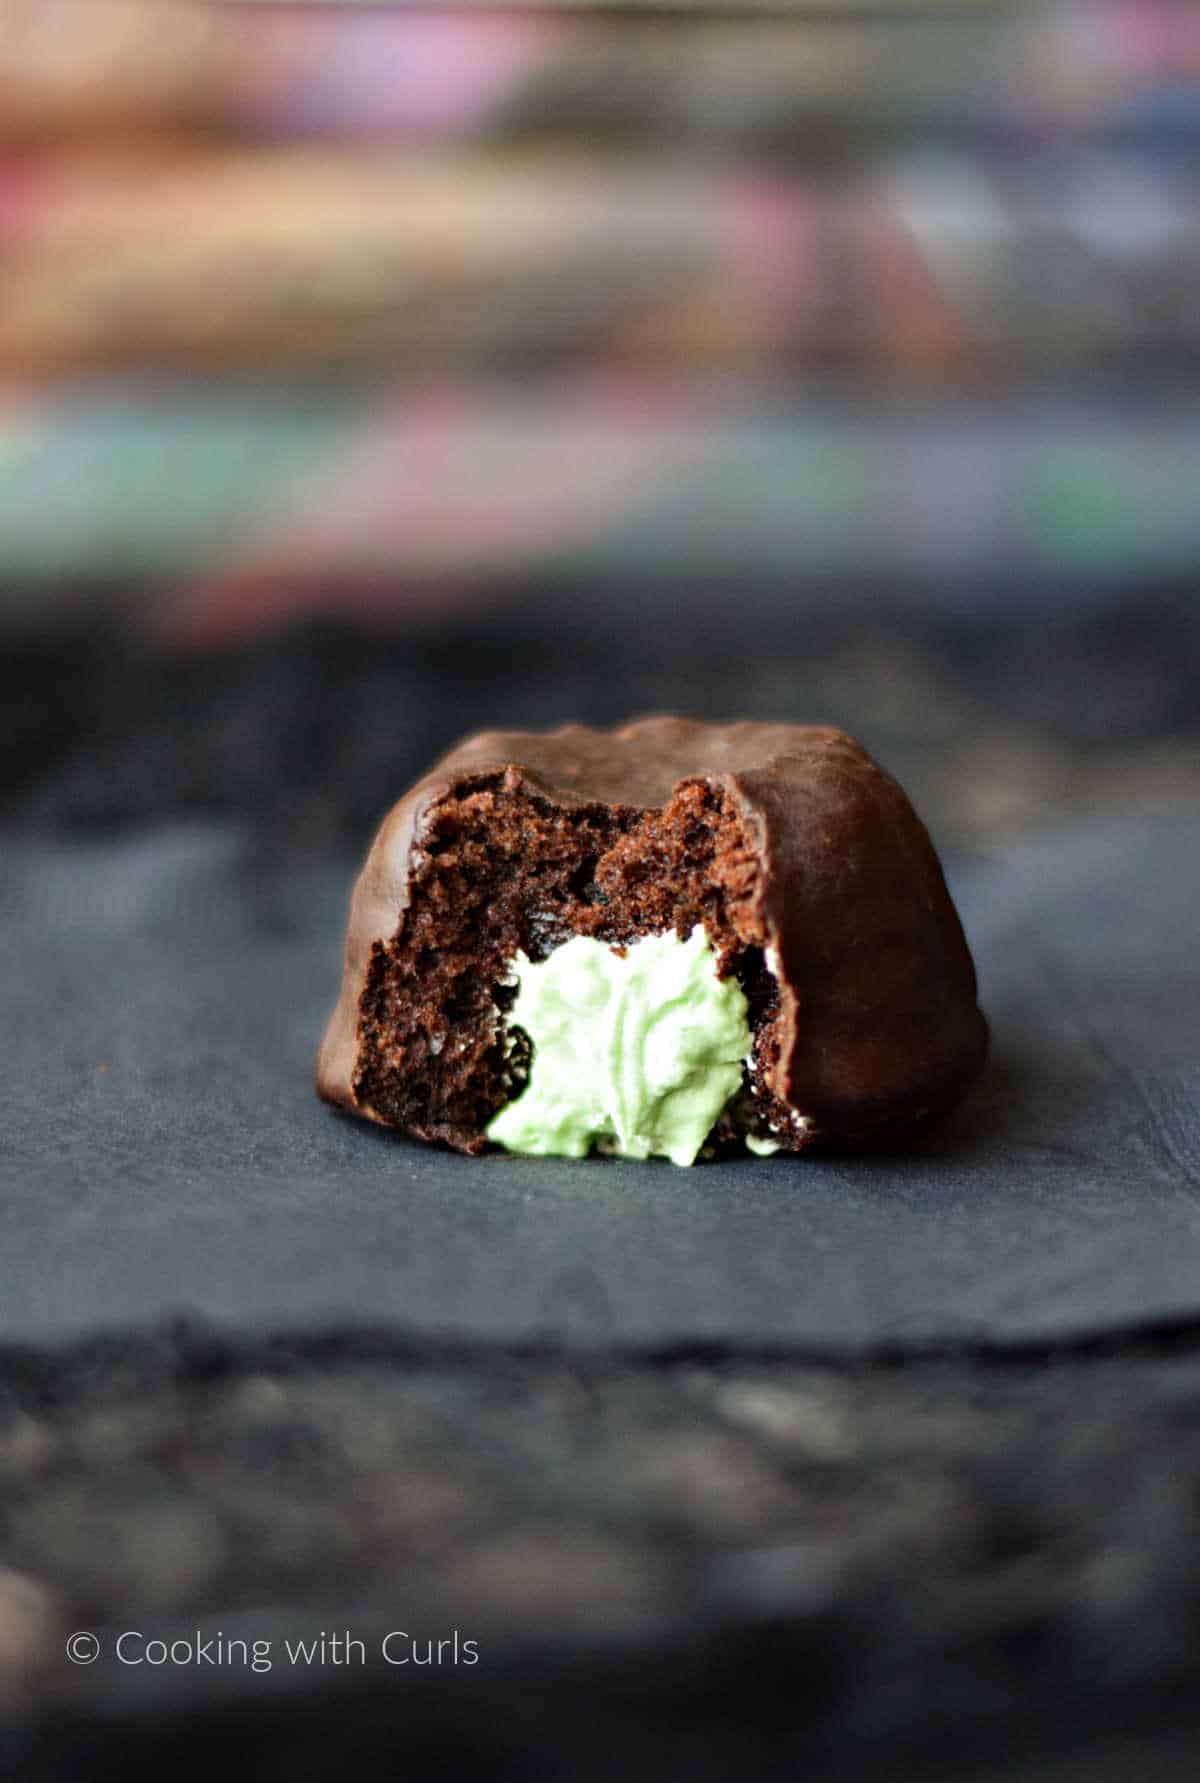 A chocolate covered cupcake with green frosting oozing out of the center on a black napkin with Harry Potter books in the background.